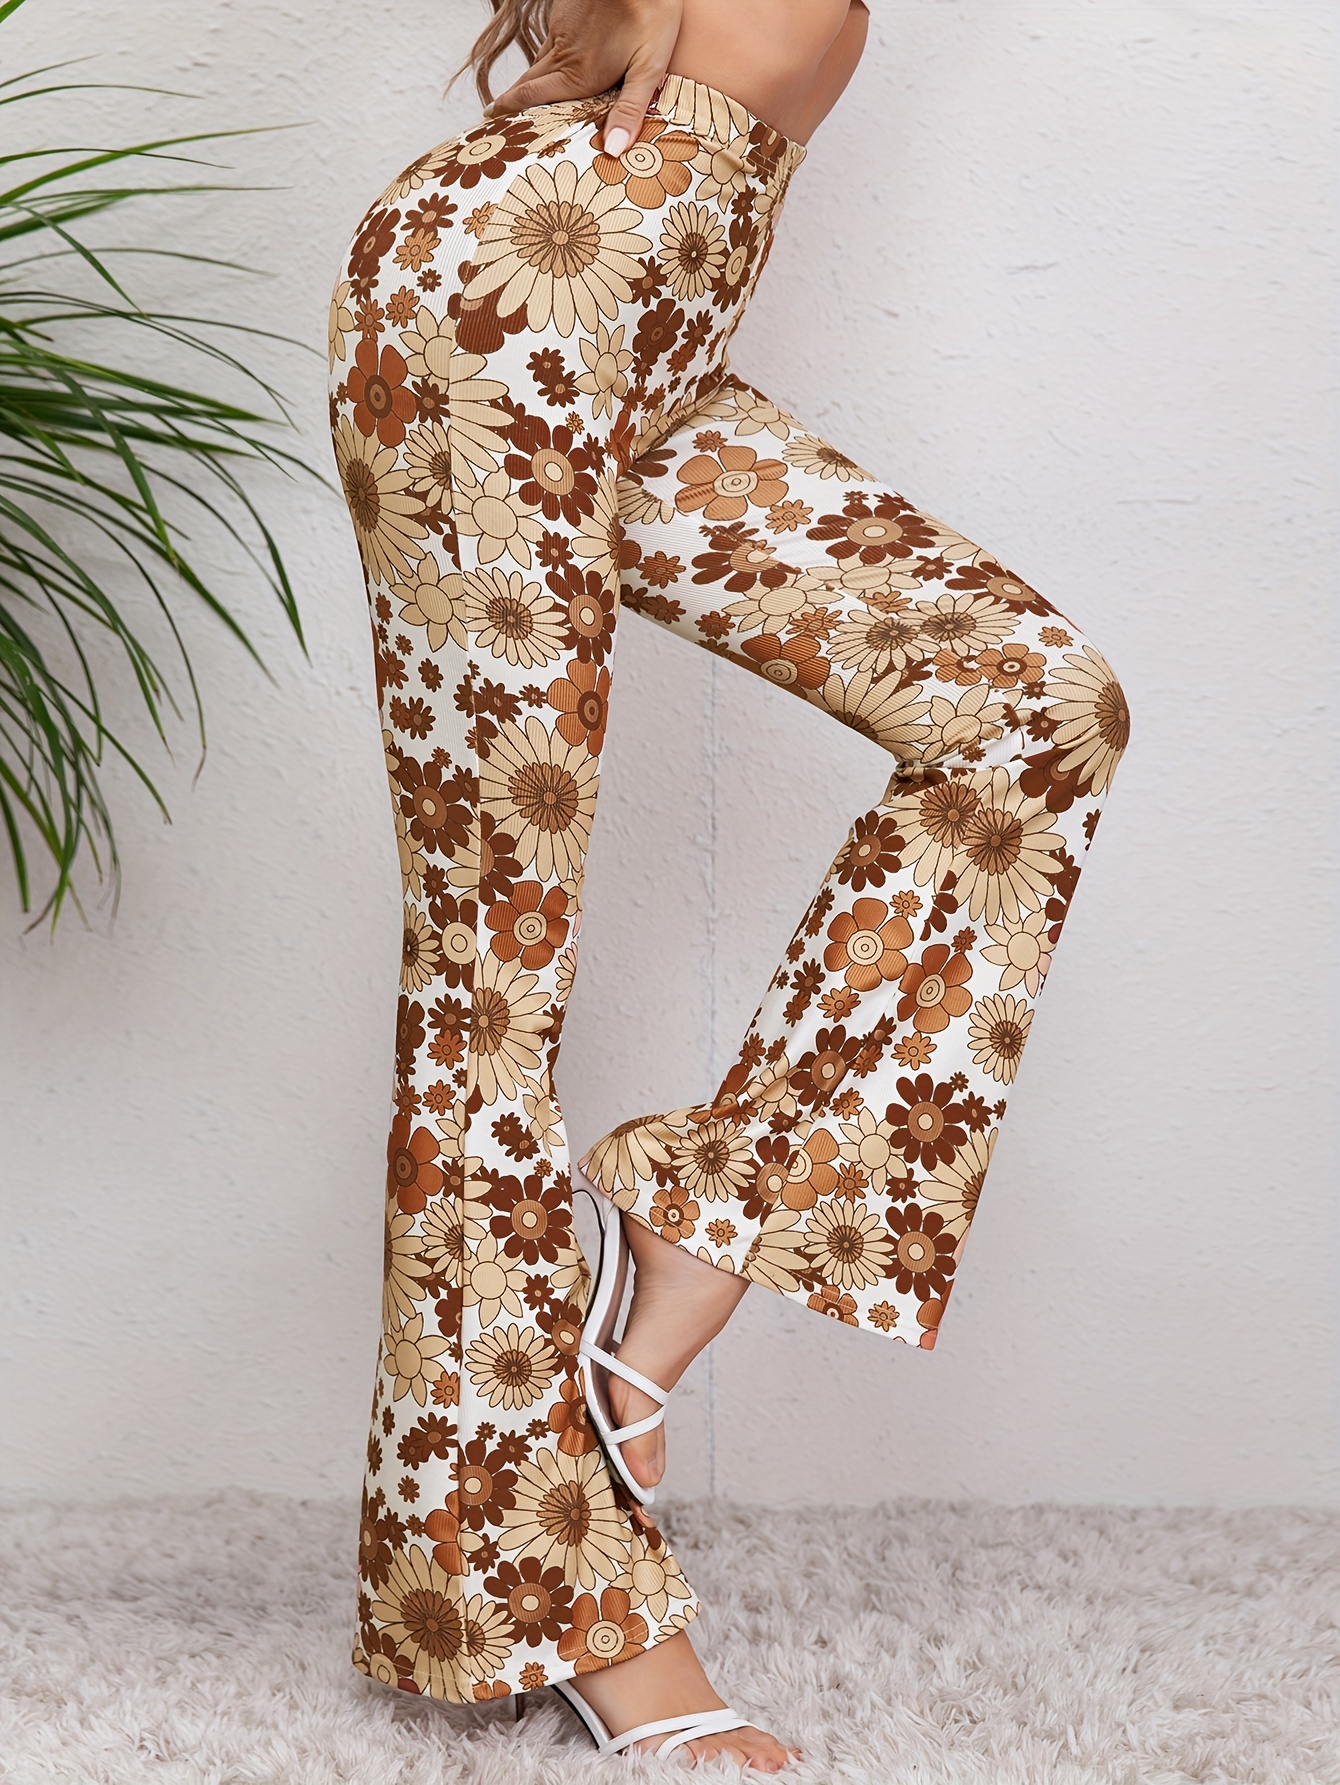 Cow Print High-Rise Flare Pants  Cow outfits, Printed pants, Print clothes